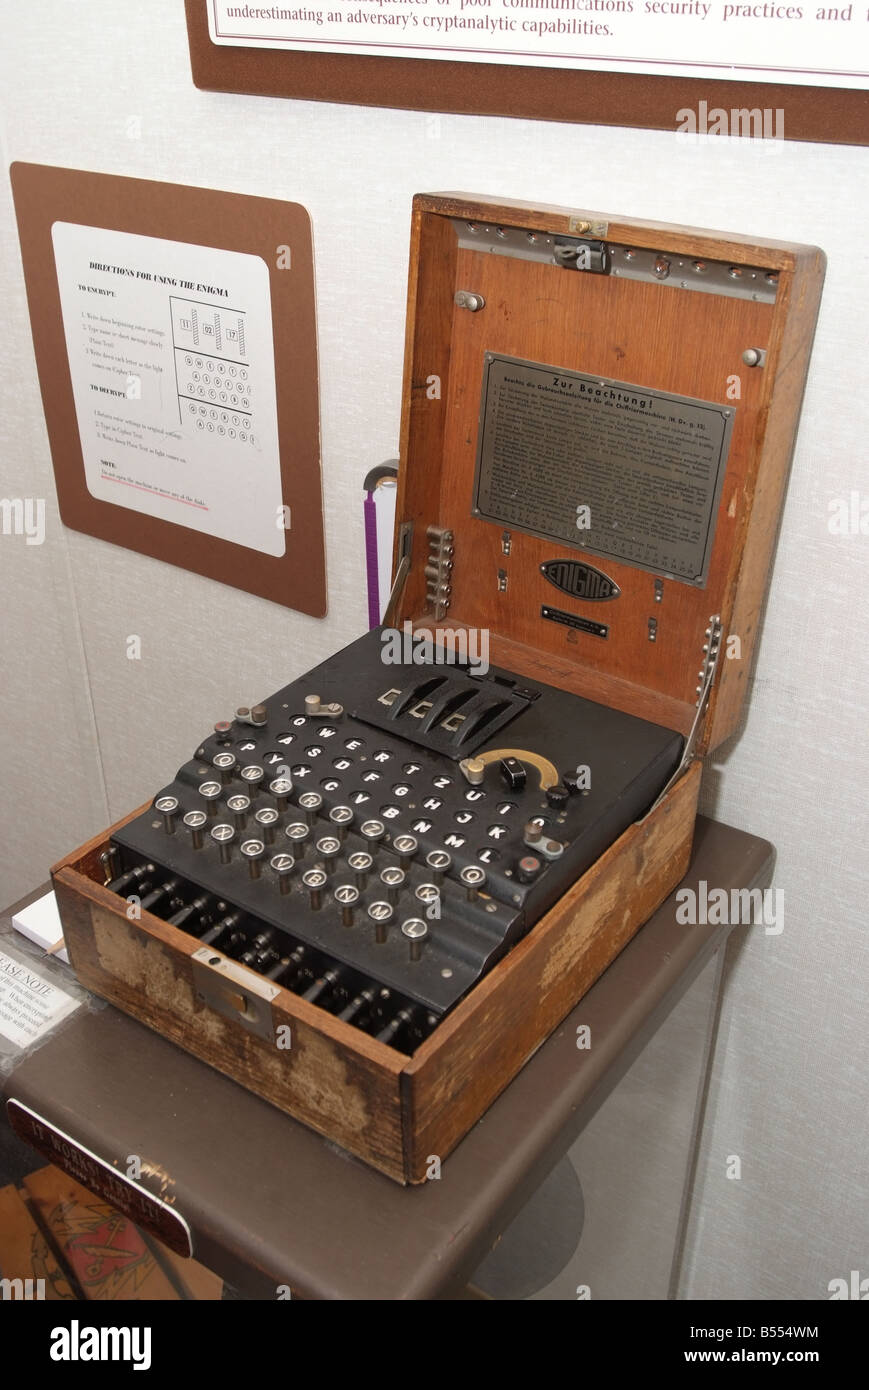 Das National Cryptologic Museum bei der National Security Administration im Anne Arundel County in Maryland Stockfoto